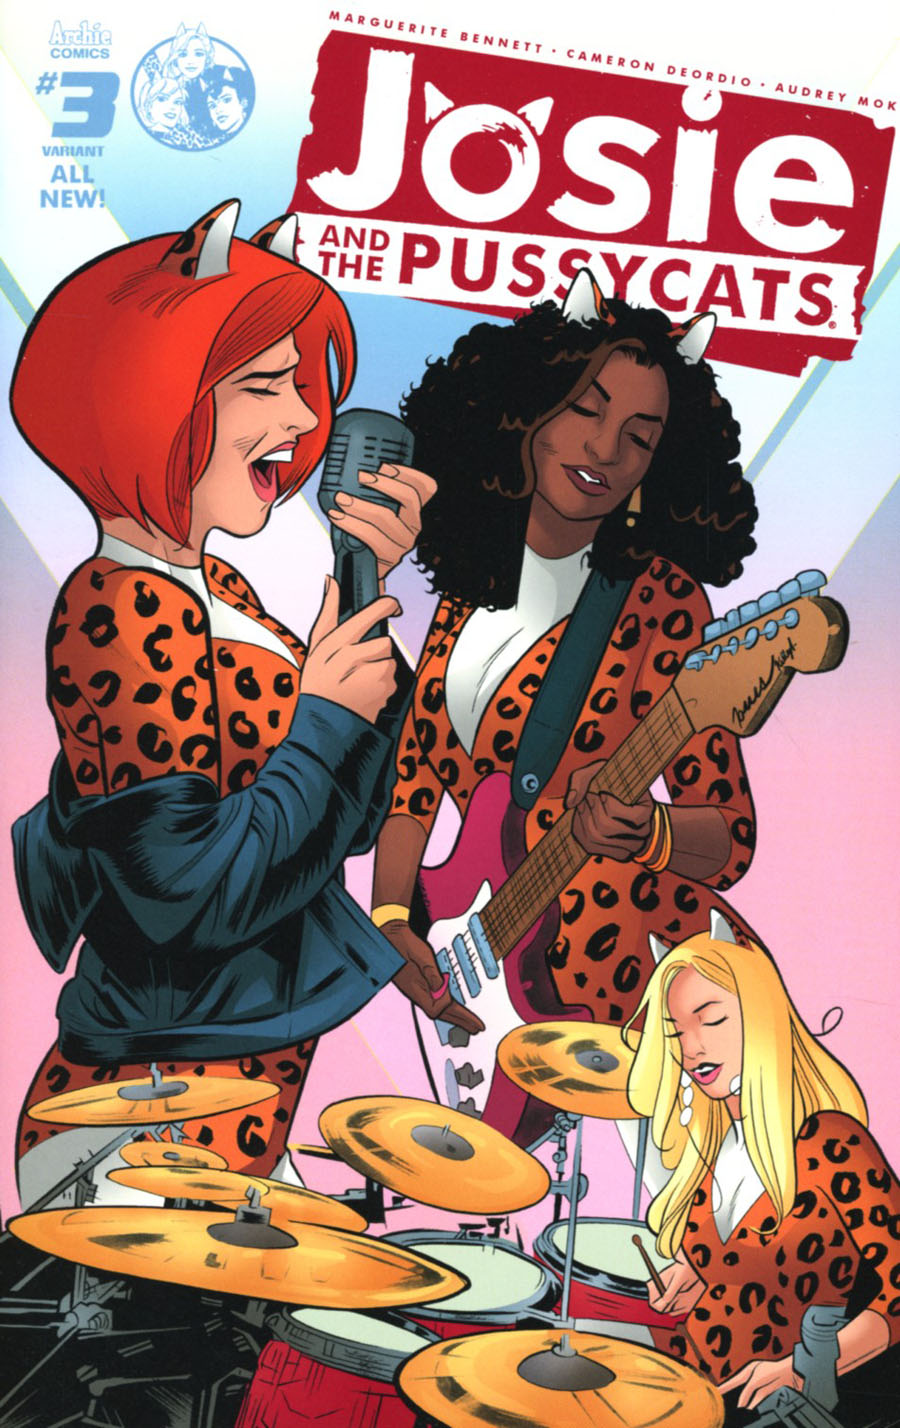 Josie And The Pussycats Vol 2 #3 Cover B Variant Wilfredo Torres Cover